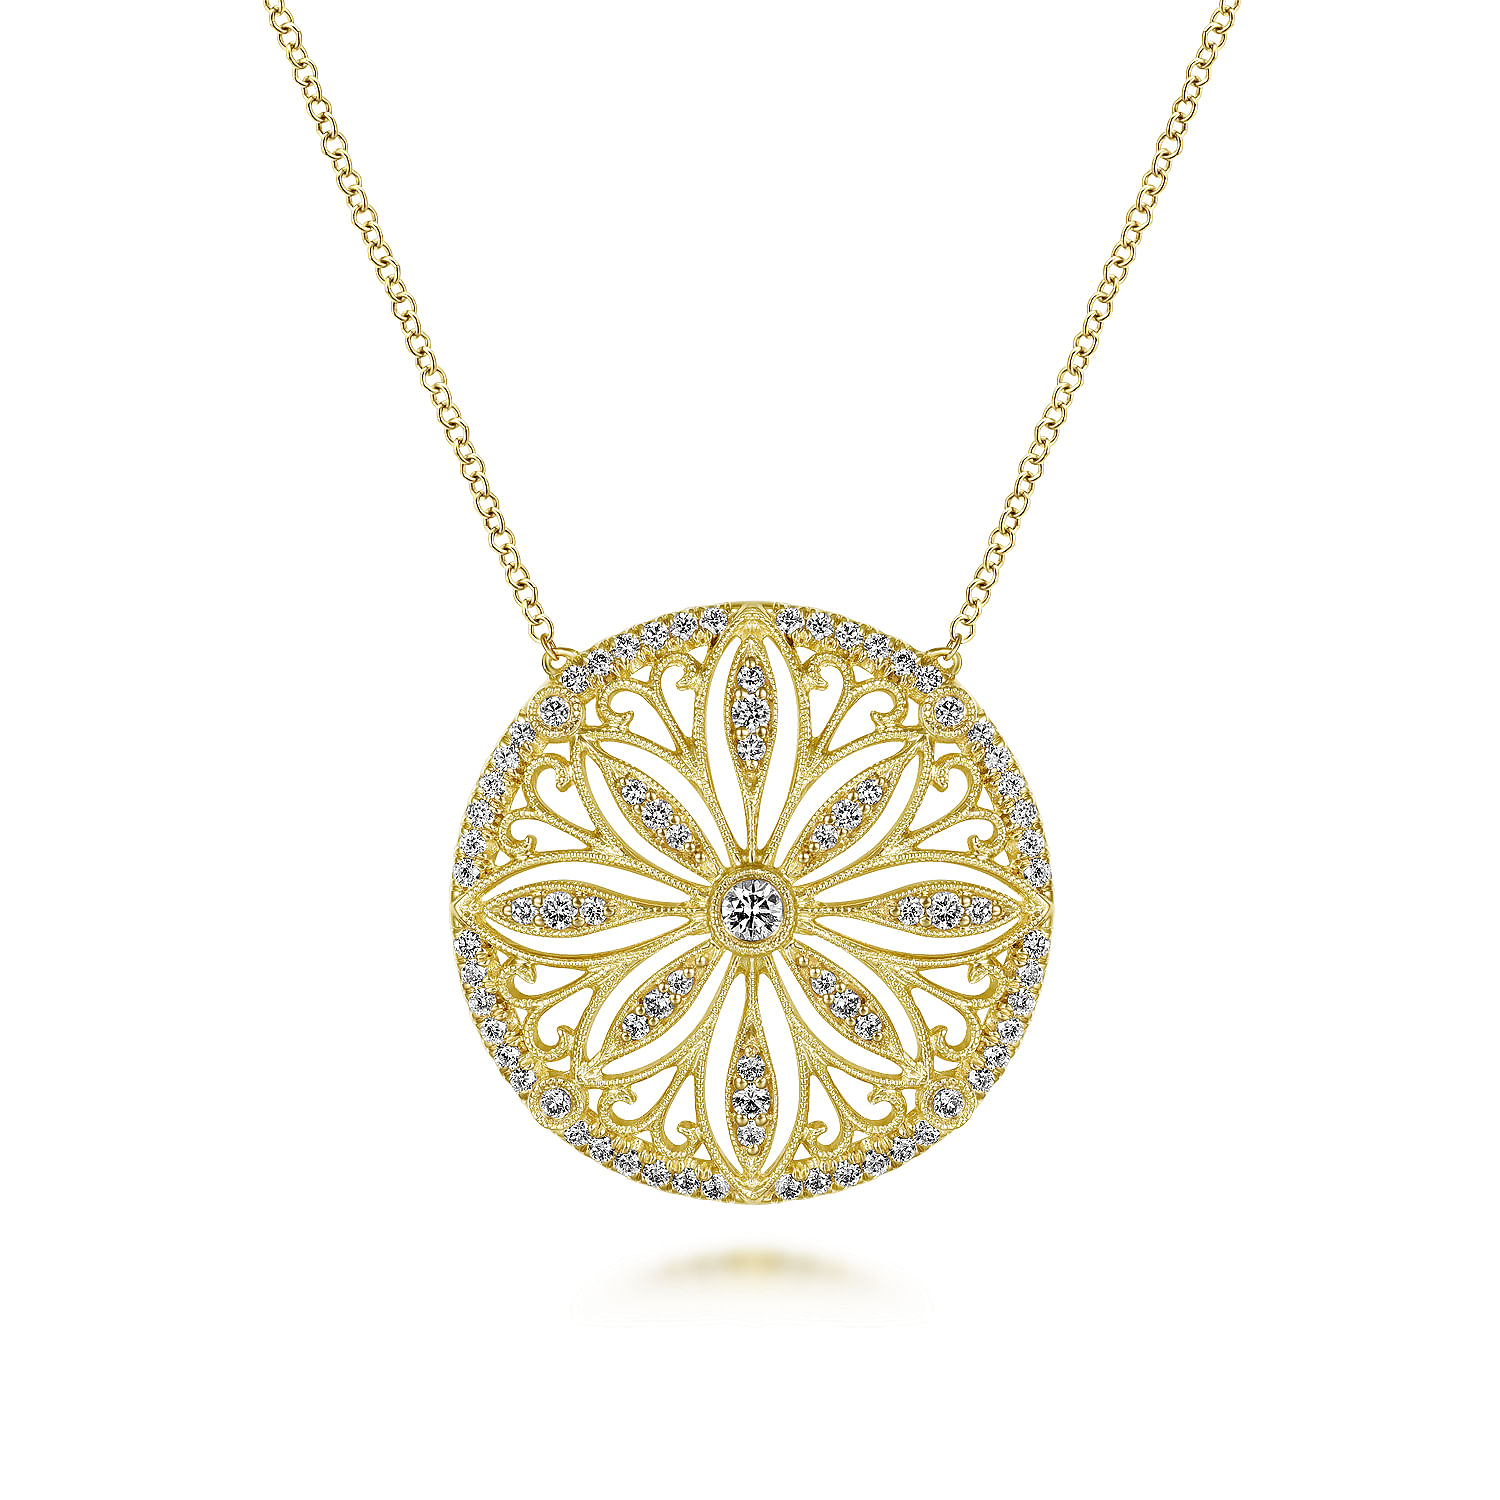 Vintage Inspired 14K Yellow Gold Floral Diamond Pendant Necklace